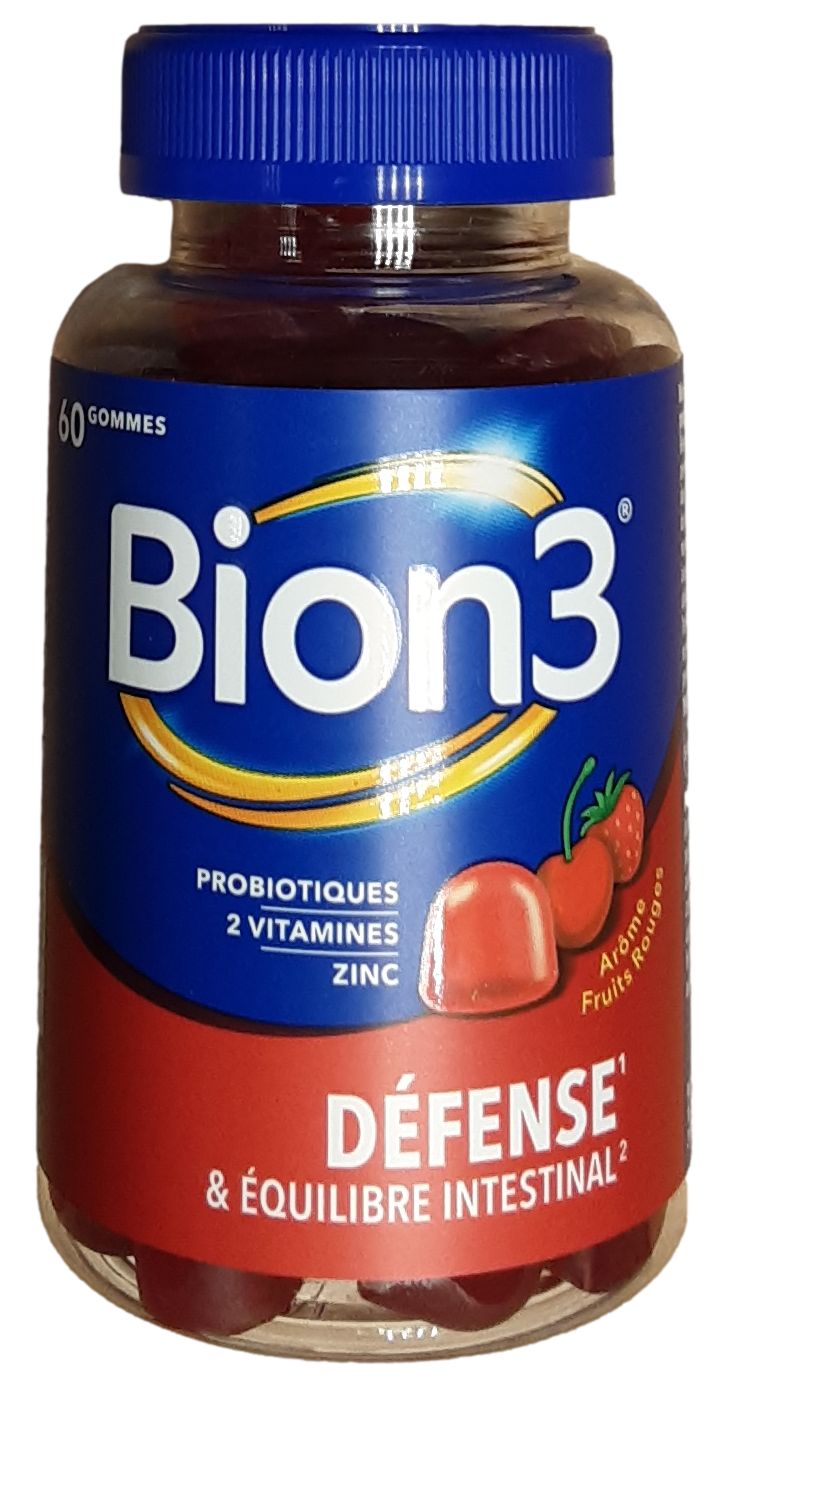 BION 3 ENERGIE gomme fruits rouges   60 gommes